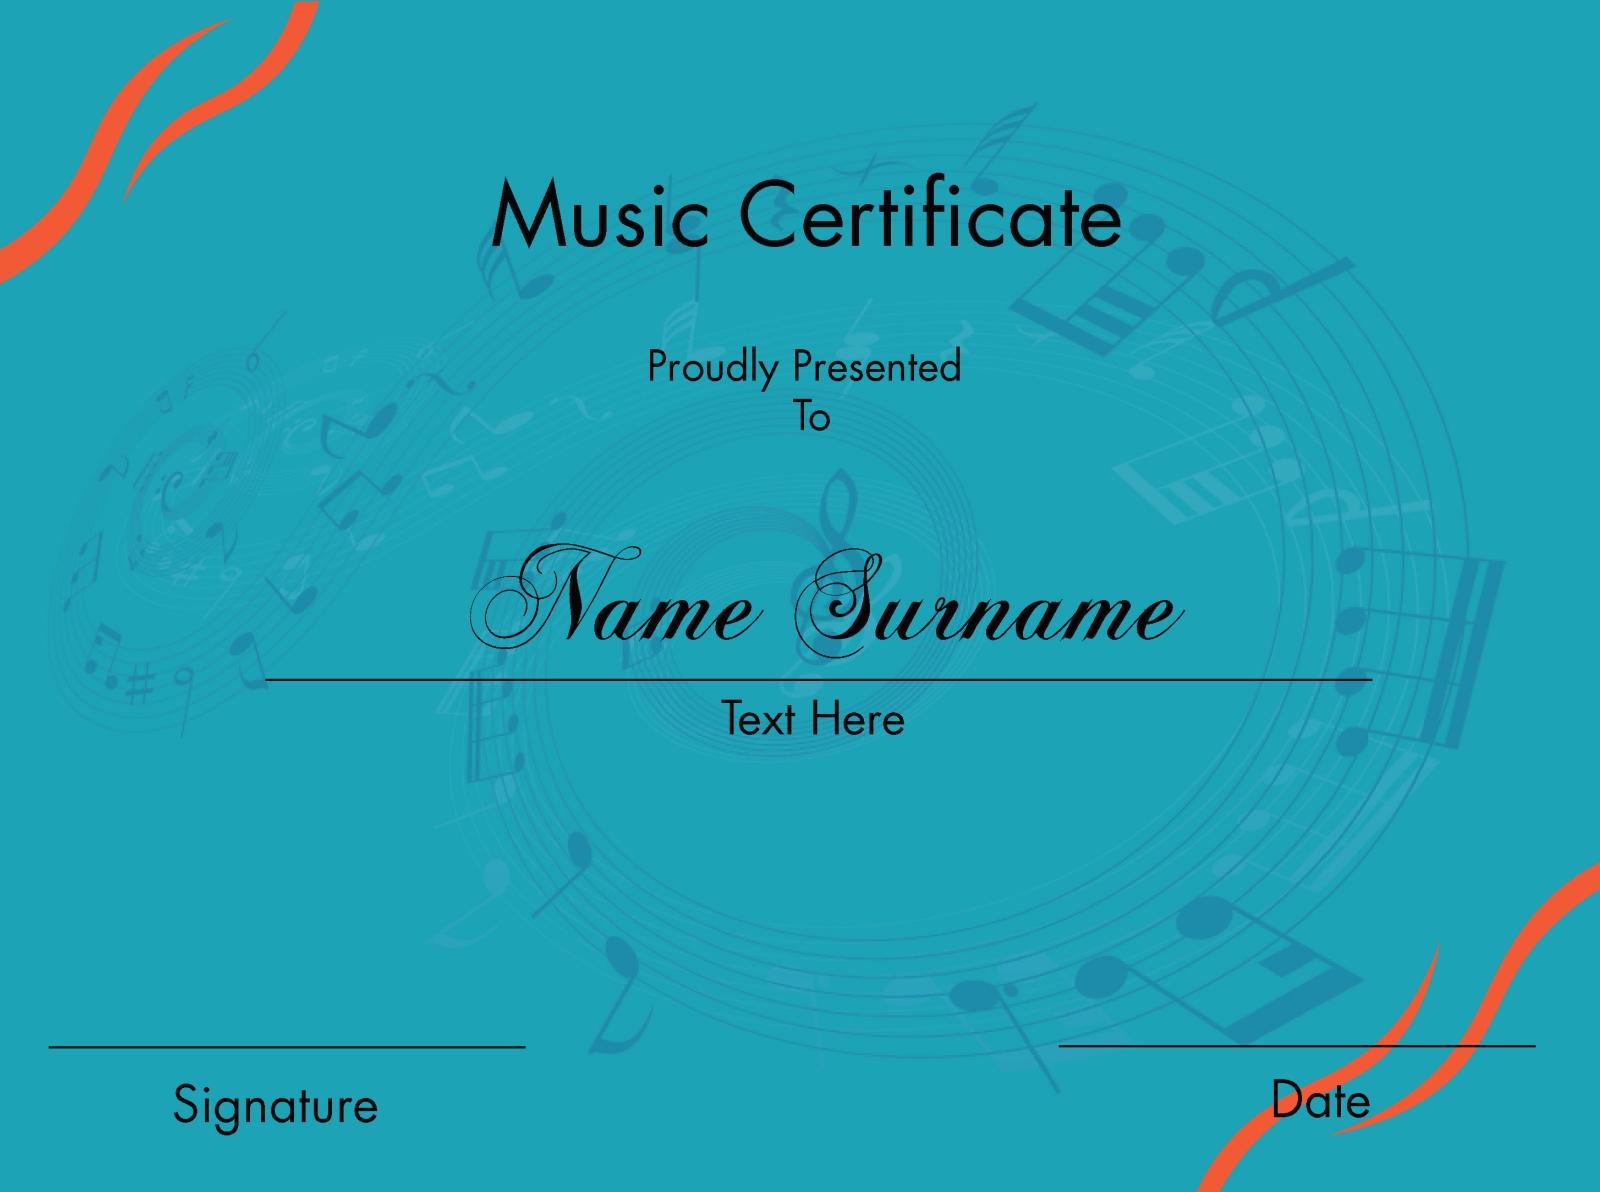 music-certificate-by-livumile-magoqwana-on-dribbble